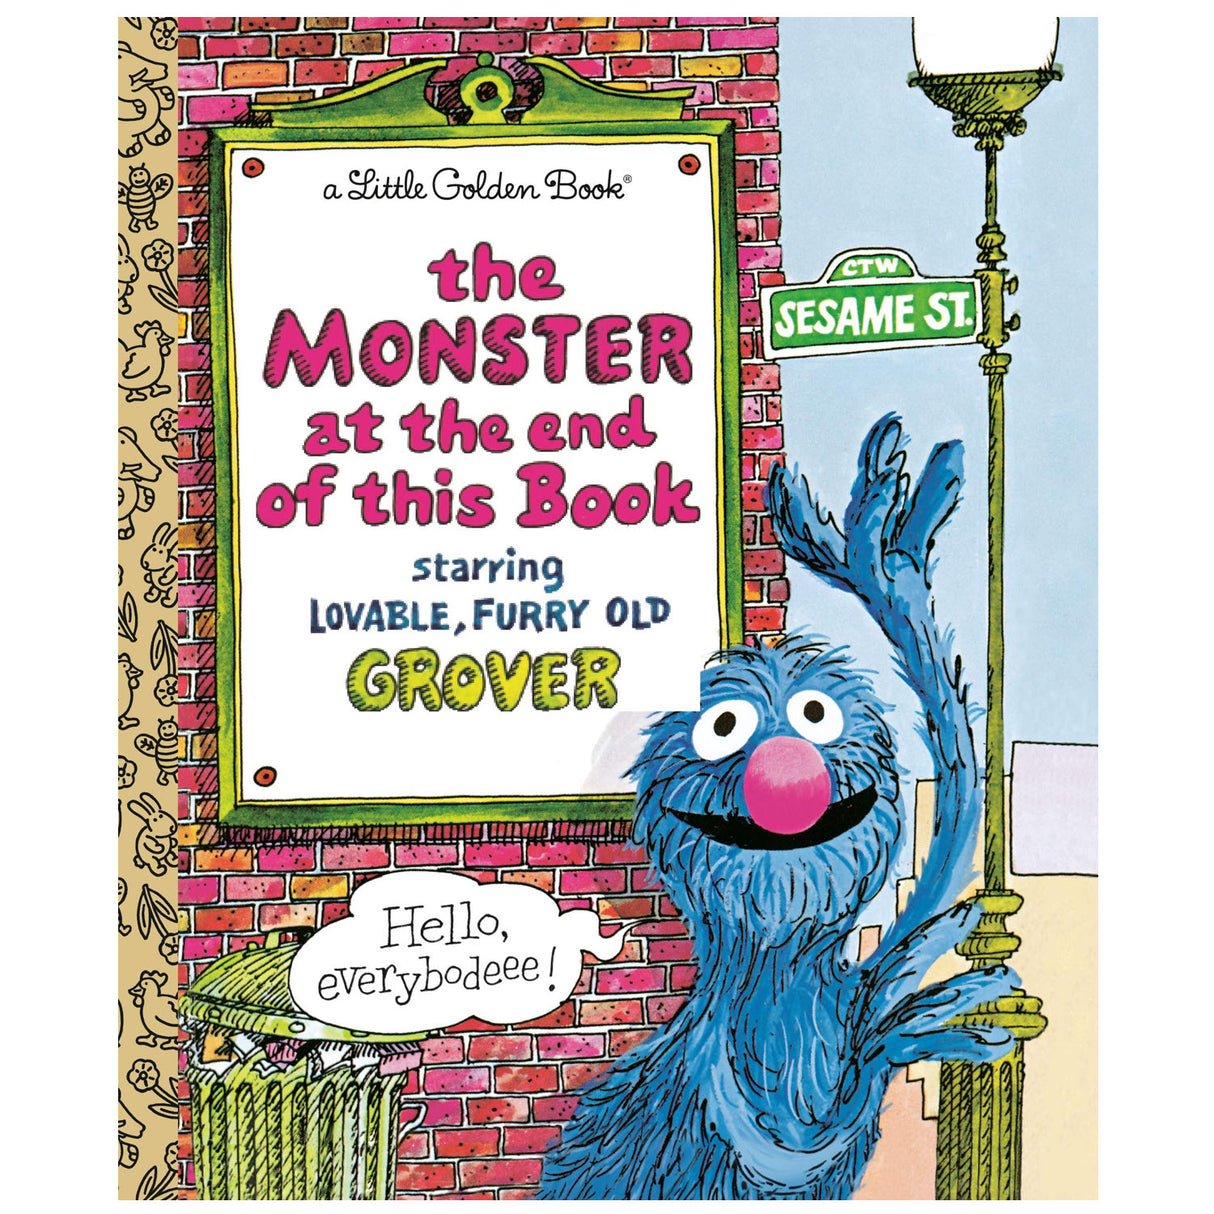 Little Golden Book: The Monster at the End of the Book